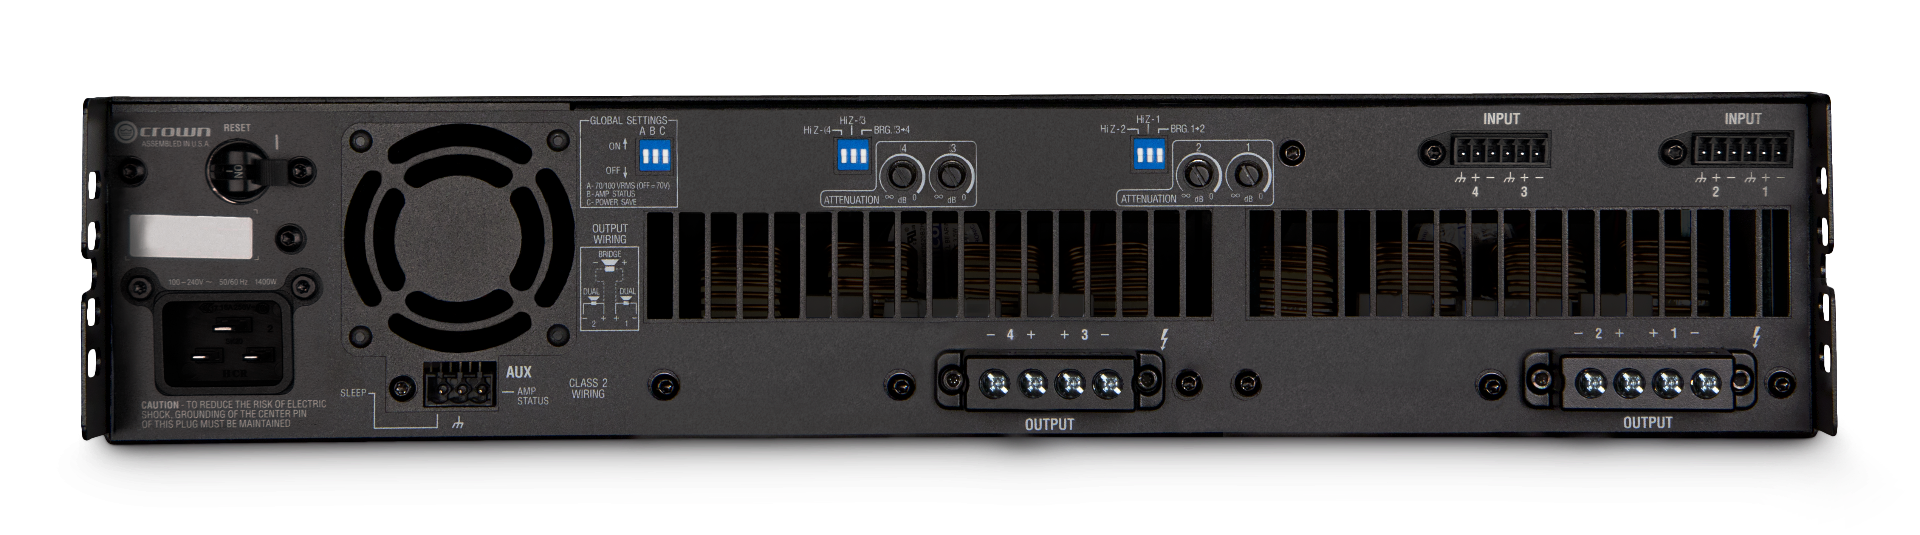 Crown DCi4|1250 - 1250W 4-Channel DriveCore Install Analog Amplifier